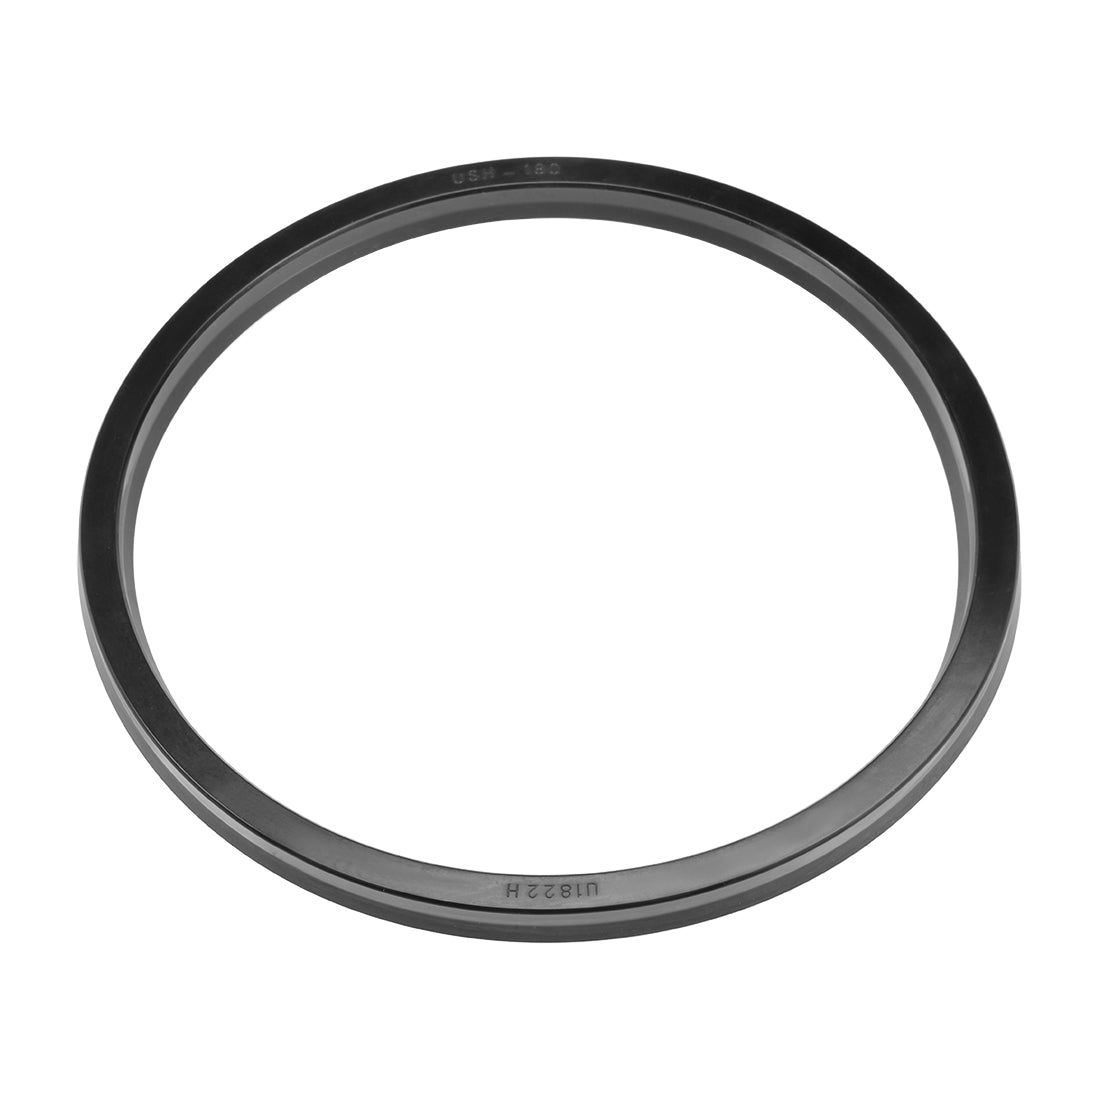 uxcell Uxcell Hydraulic Seal, Piston Shaft USH Oil Sealing O-Ring, 180mm x 200mm x 12mm